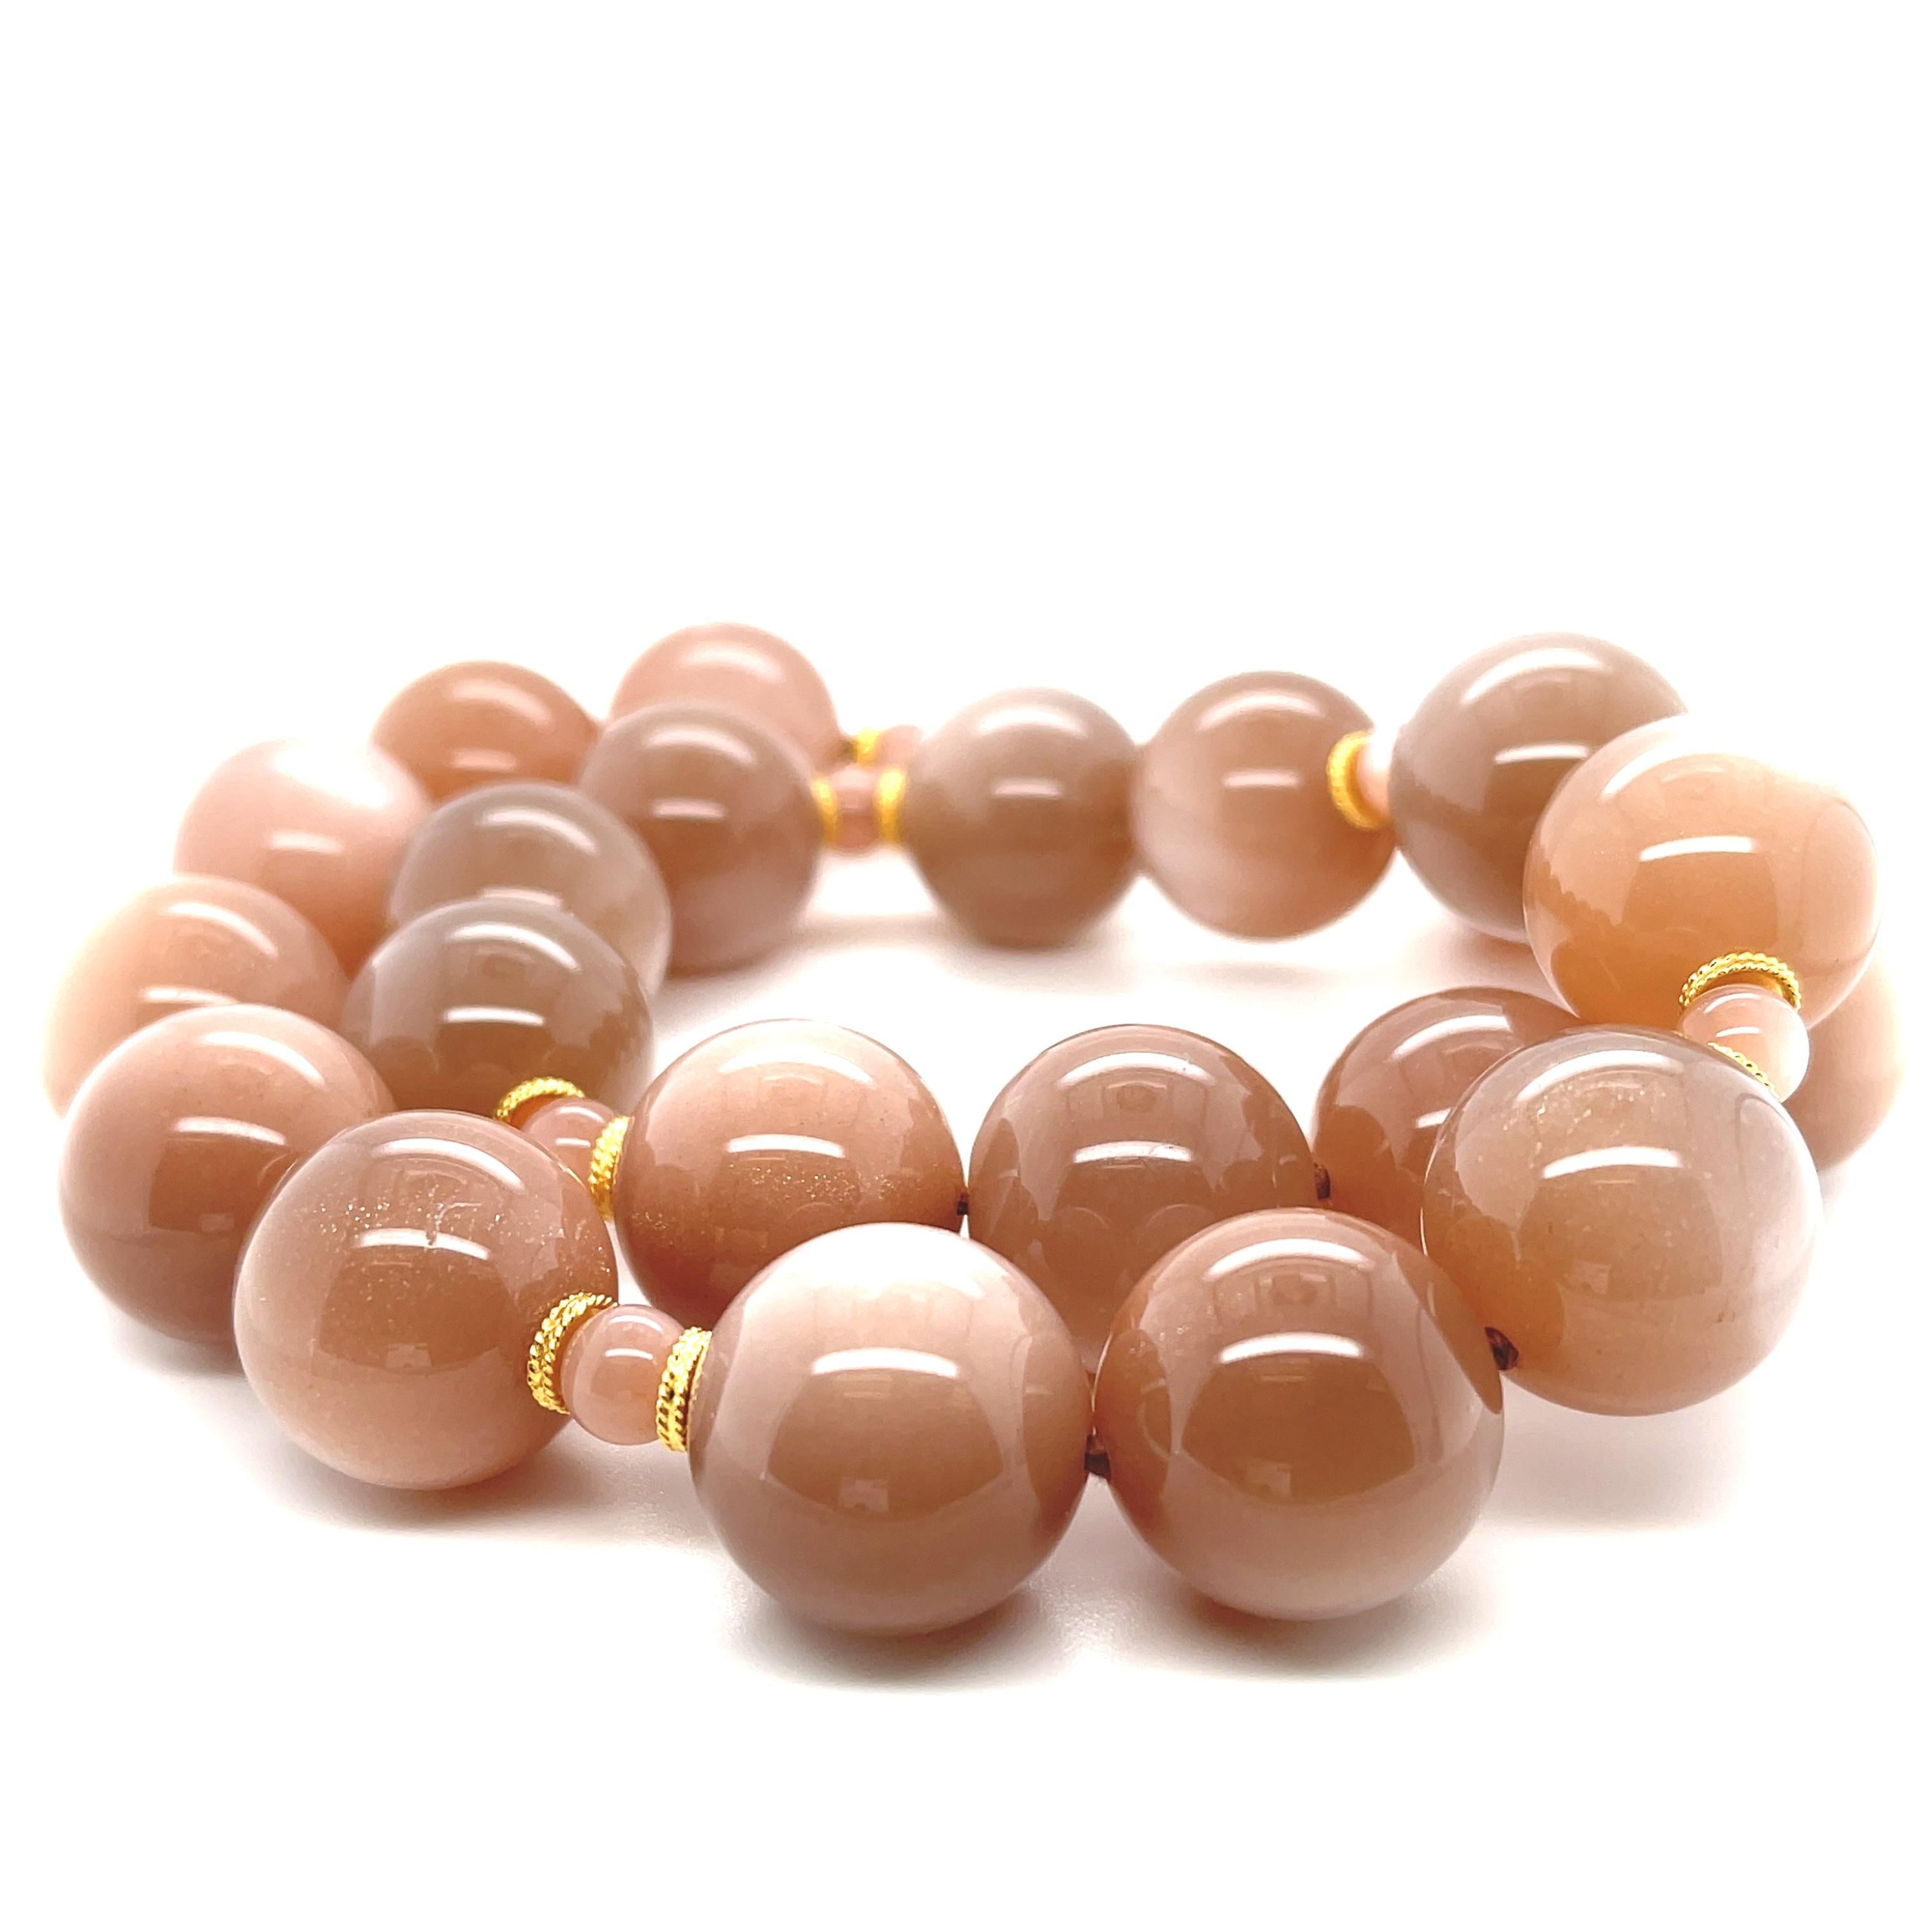 This gorgeous strand of 18mm moonstone beads is so elegant and sophisticated! With beautiful peach-toned body color and shimmering white adularescence that dances across each bead, these gems are a lovely representation of Pantone's 2024 Color of